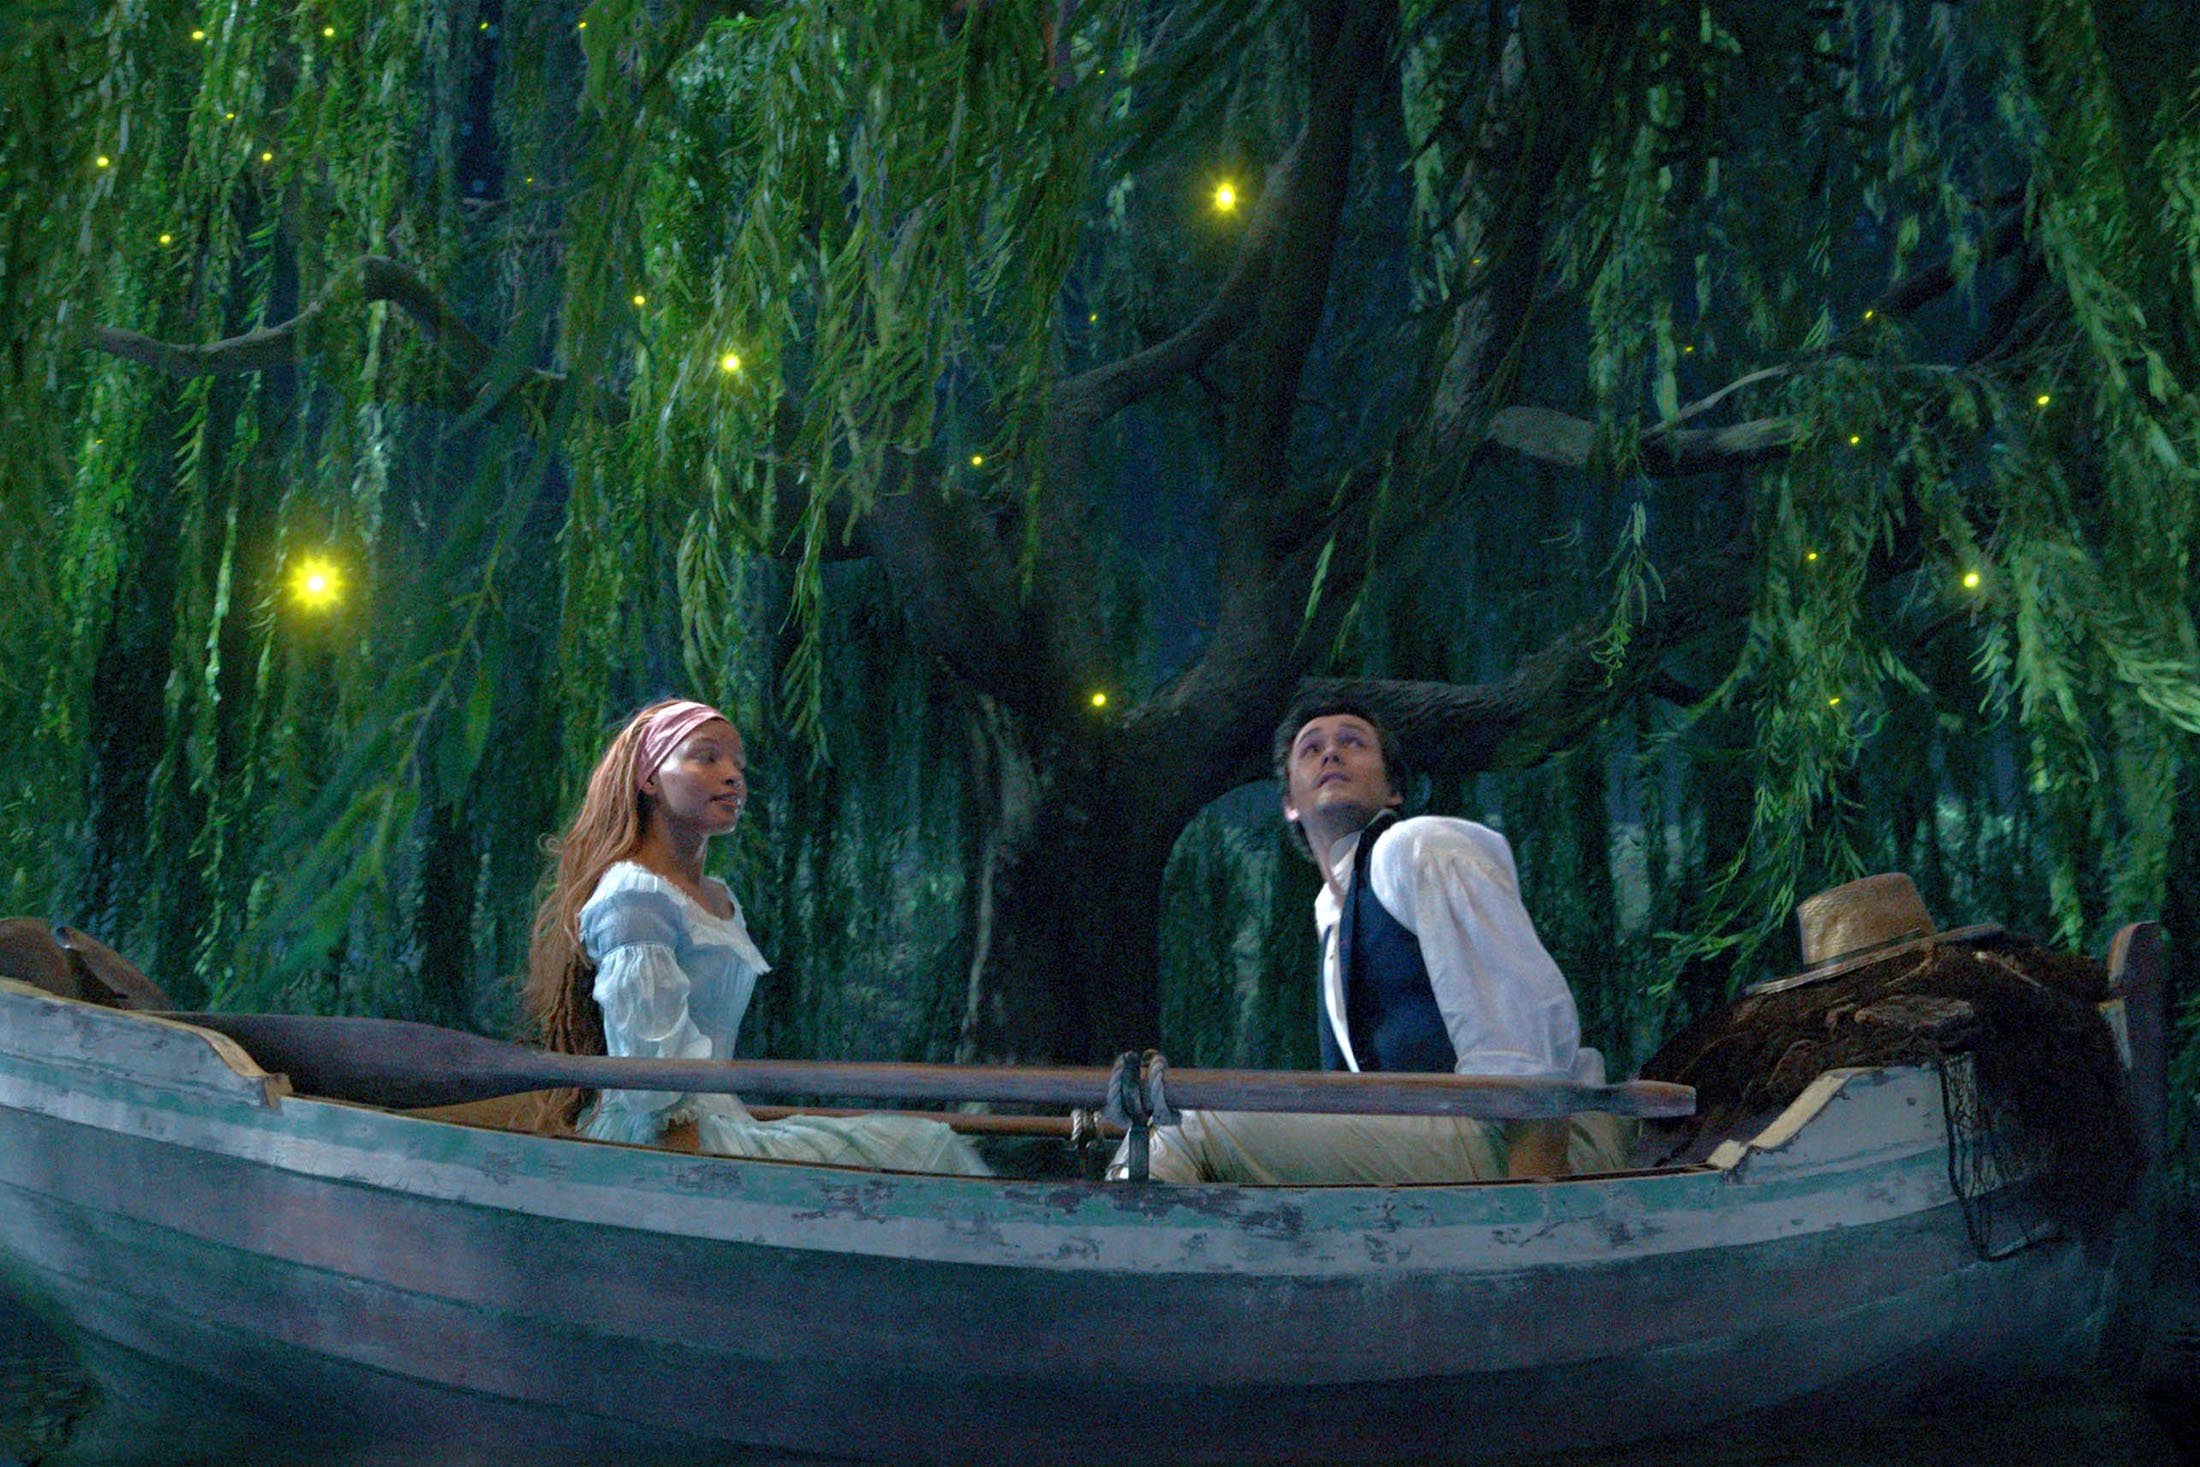 Halle Bailey (L) as Ariel and Jonah Hauer-King as Prince Eric, in a scene from the film 